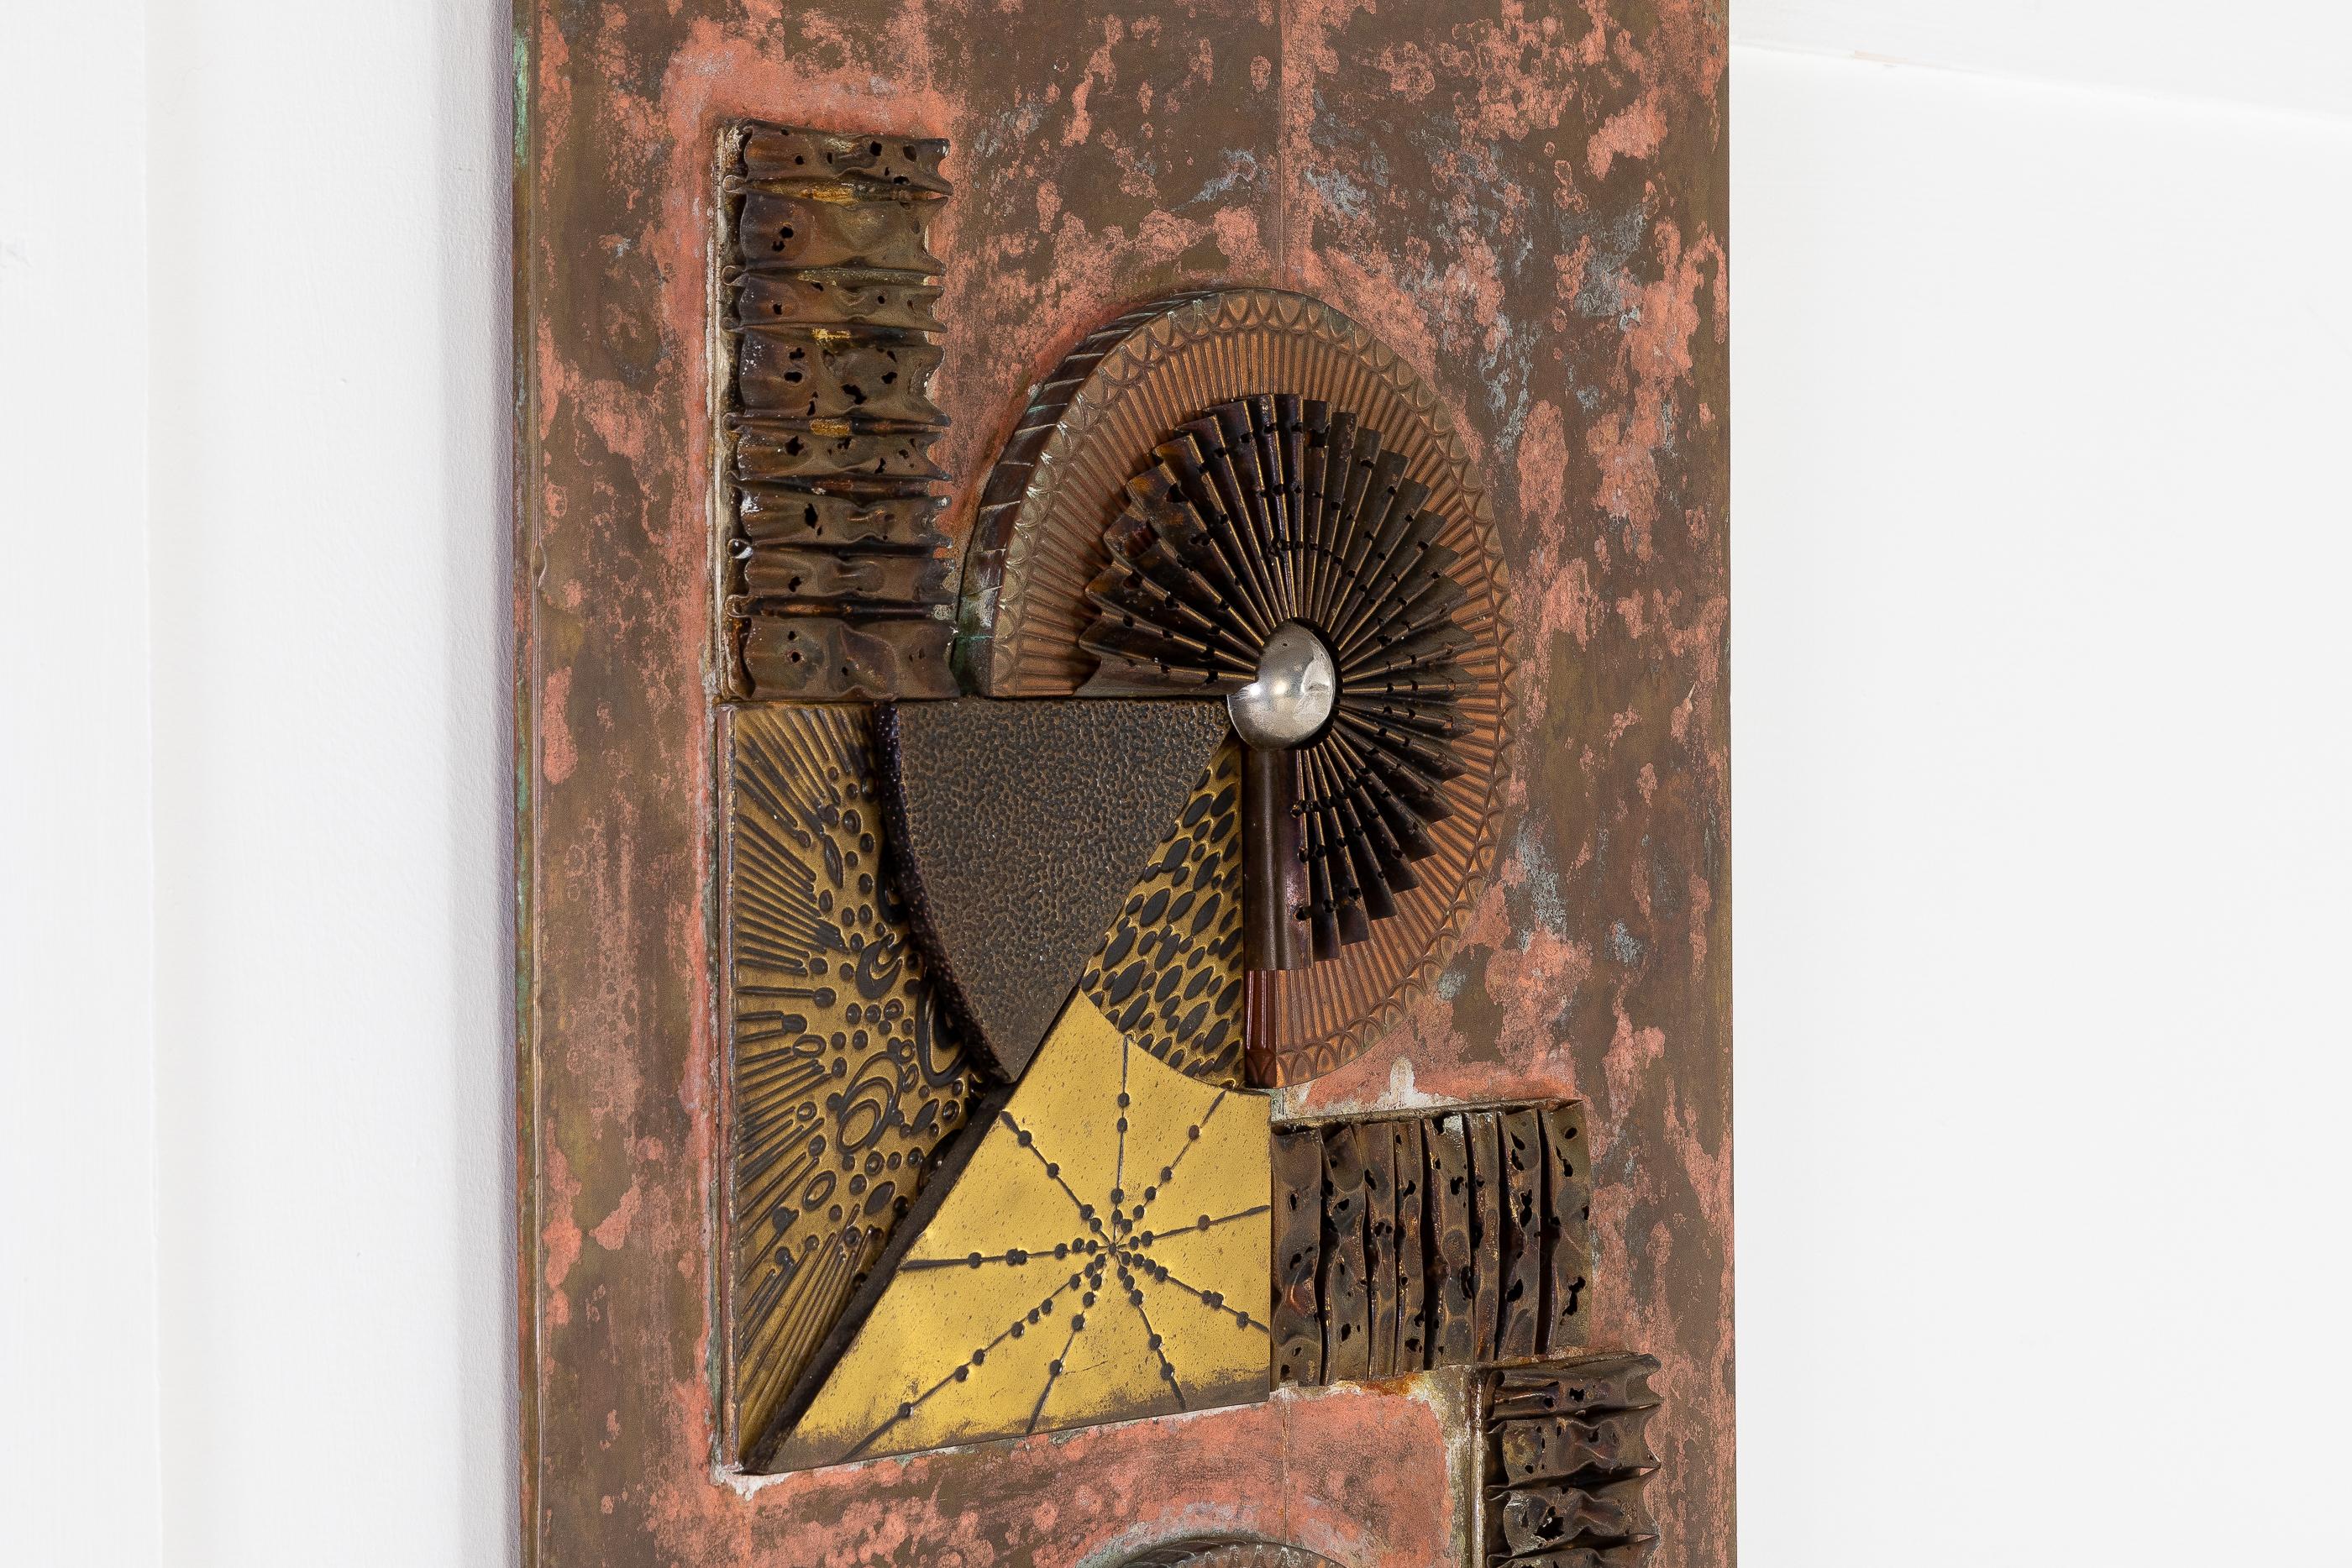 A unique 1960s French decorative metal wall panel made of brass and copper moulded into geometric forms. A nice example of decorative wall sculpture from the sixties.